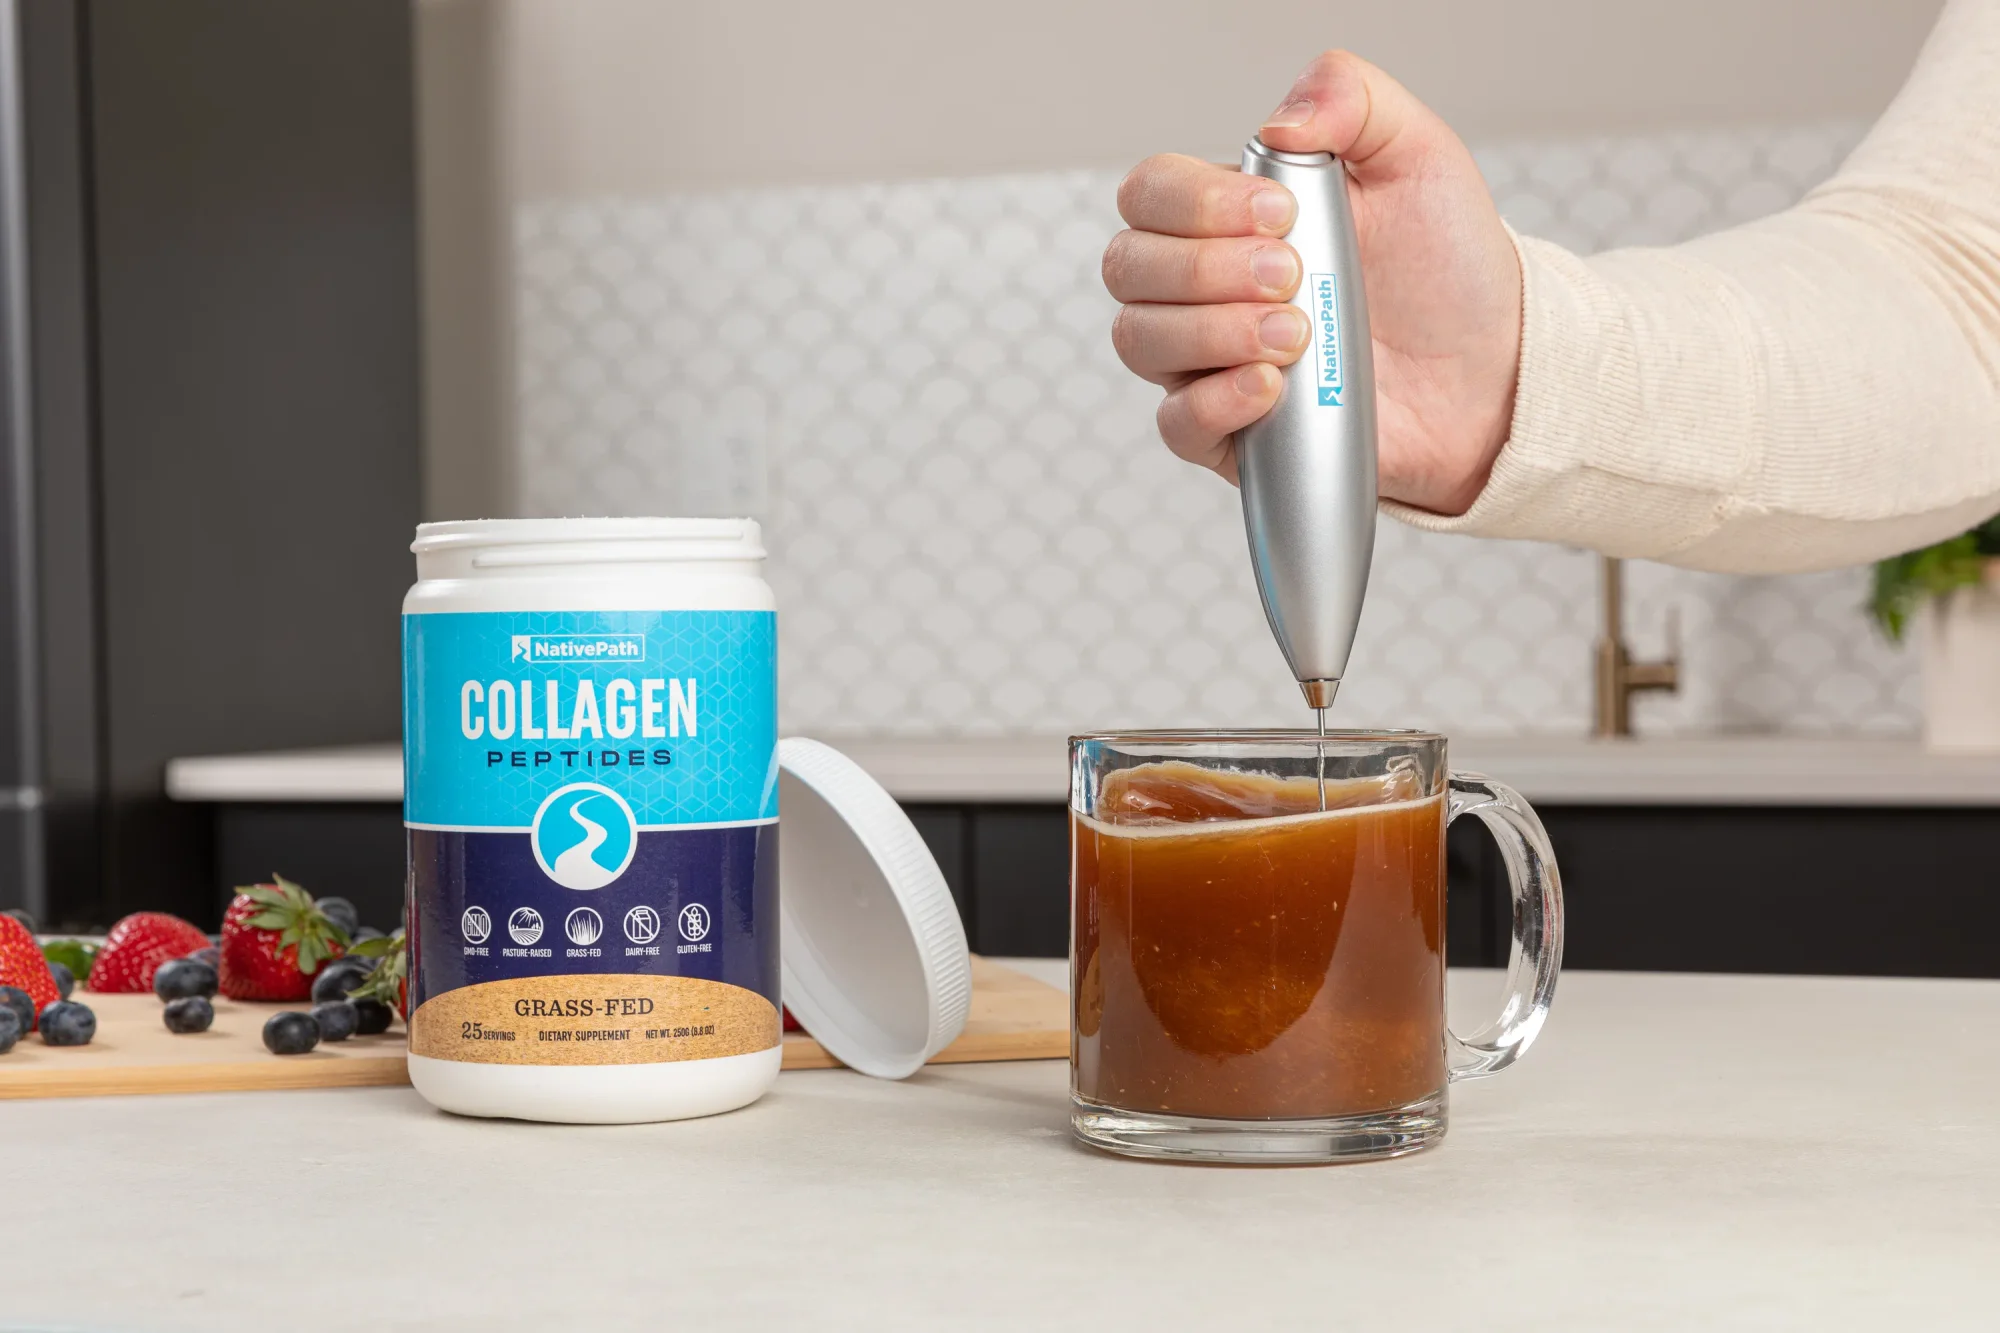 Hand holding a handheld frother. Frothing one scoop of collagen in a clear mug of coffee. NativePath Original Collagen jar off to the side. Kitchen setting.